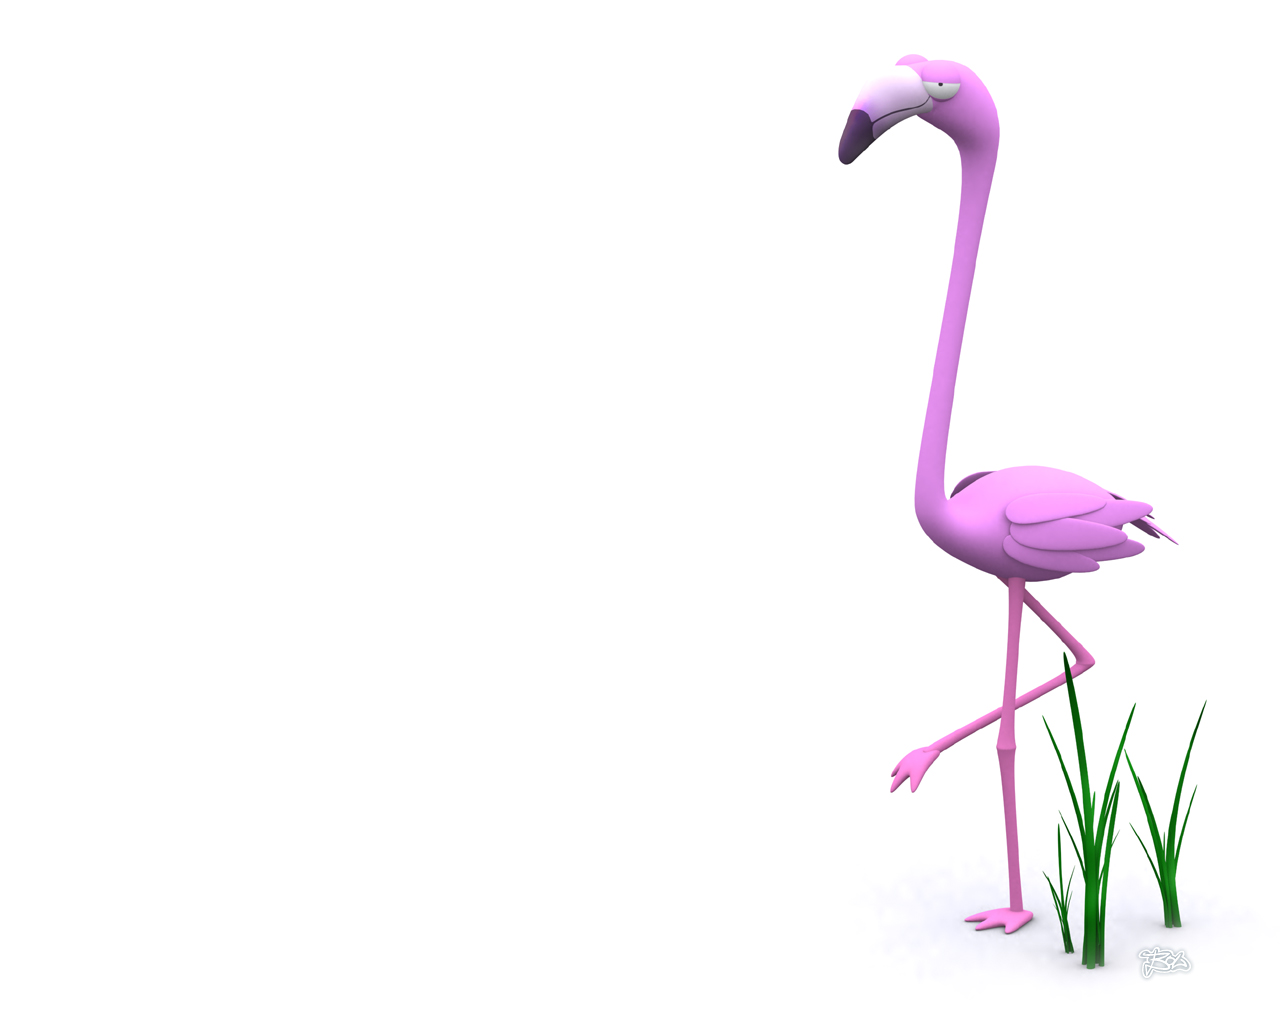 Hd Wallpapers 3d Cartoon Animal Wallpaper - Moving Pictures Animals Dance  Animated - 1280x1024 Wallpaper 